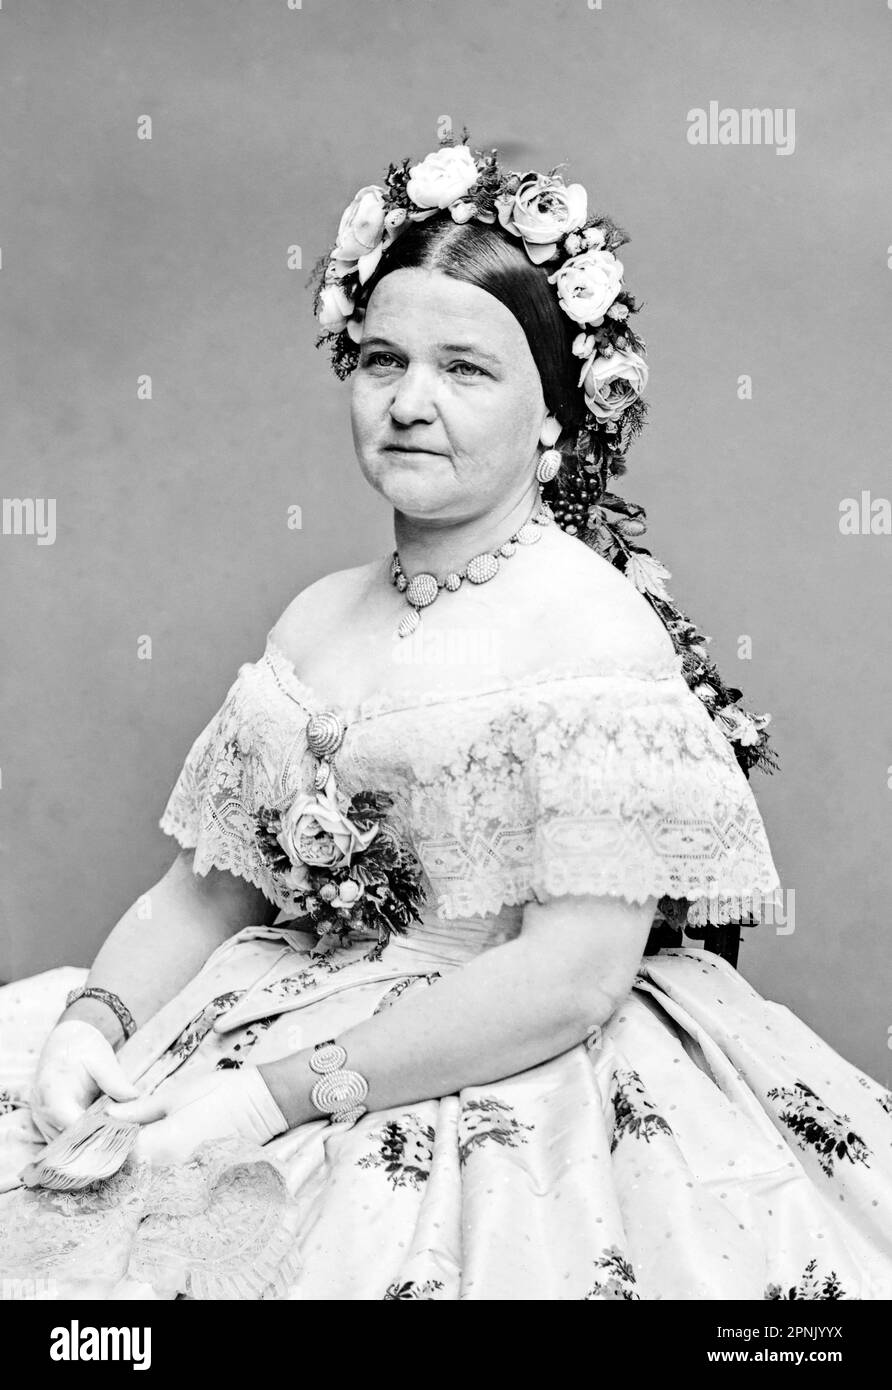 Mary Todd Lincoln. Portrait of he First Lady and wife of Abraham Lincoln, Mary Ann Todd Lincoln (1818-1882) by Mathew Brady, c. 1860-70 Stock Photo